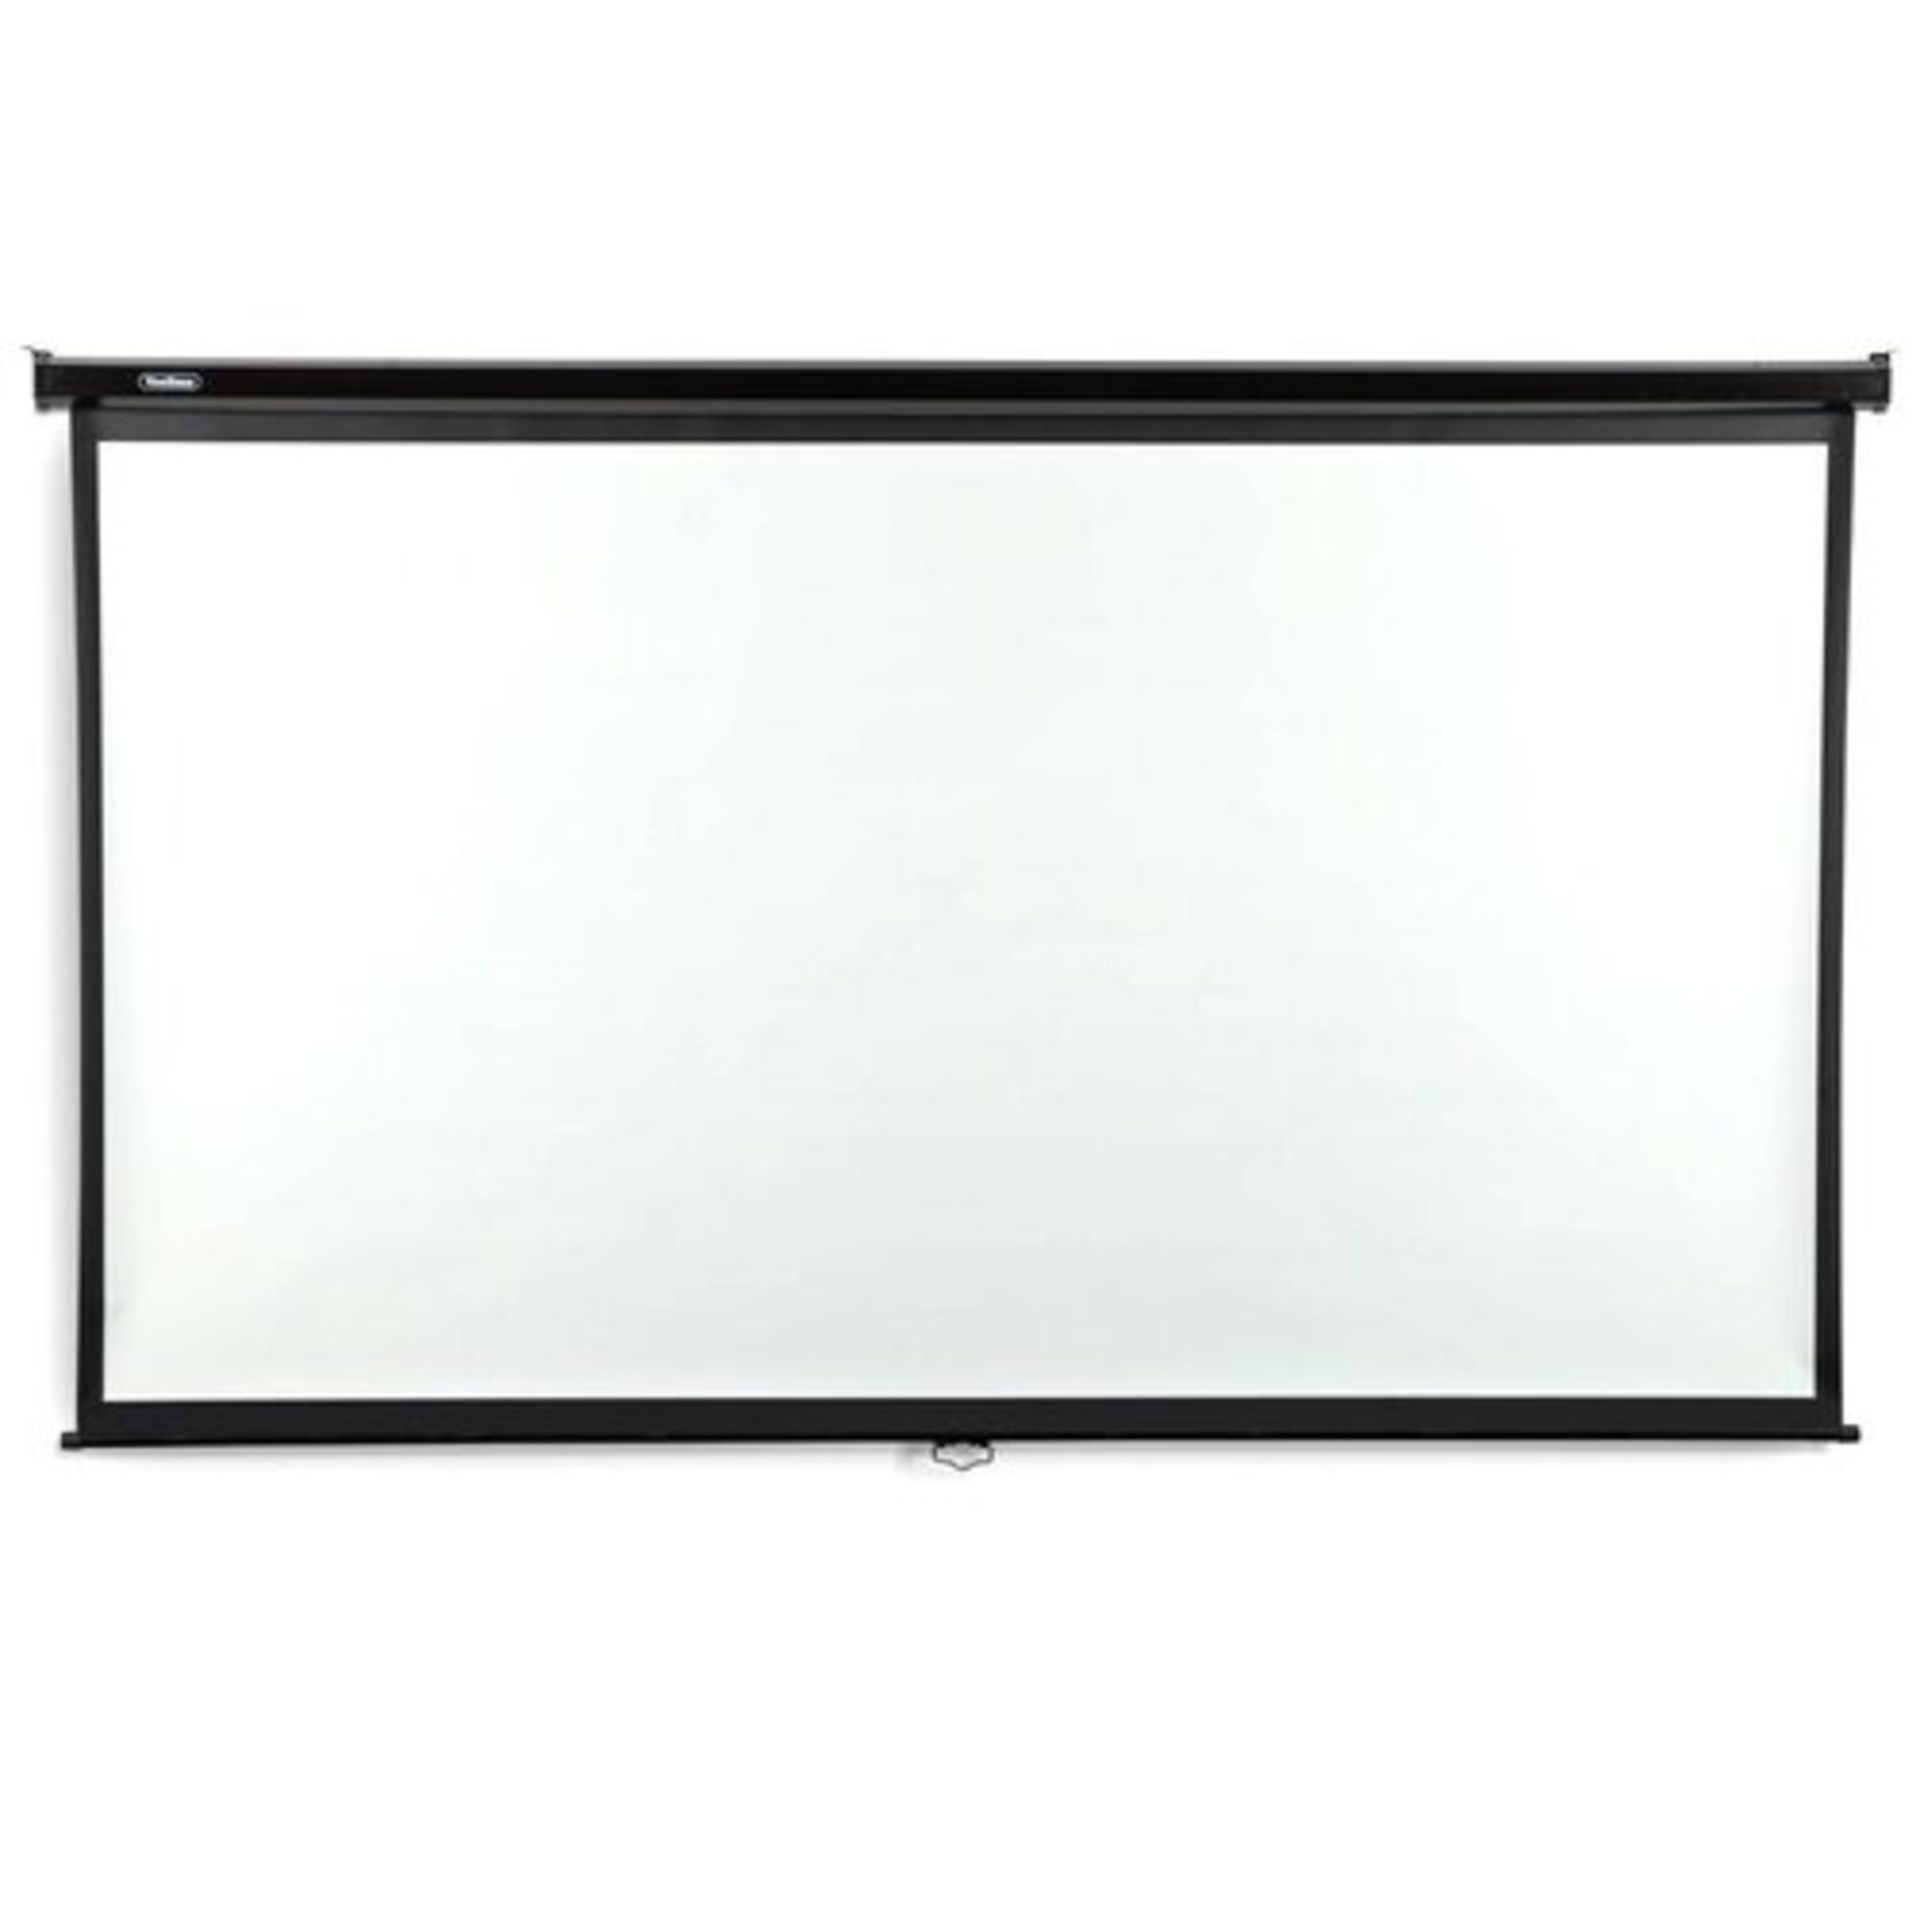 100-Inch Pull-Down Projector Screen - ER33